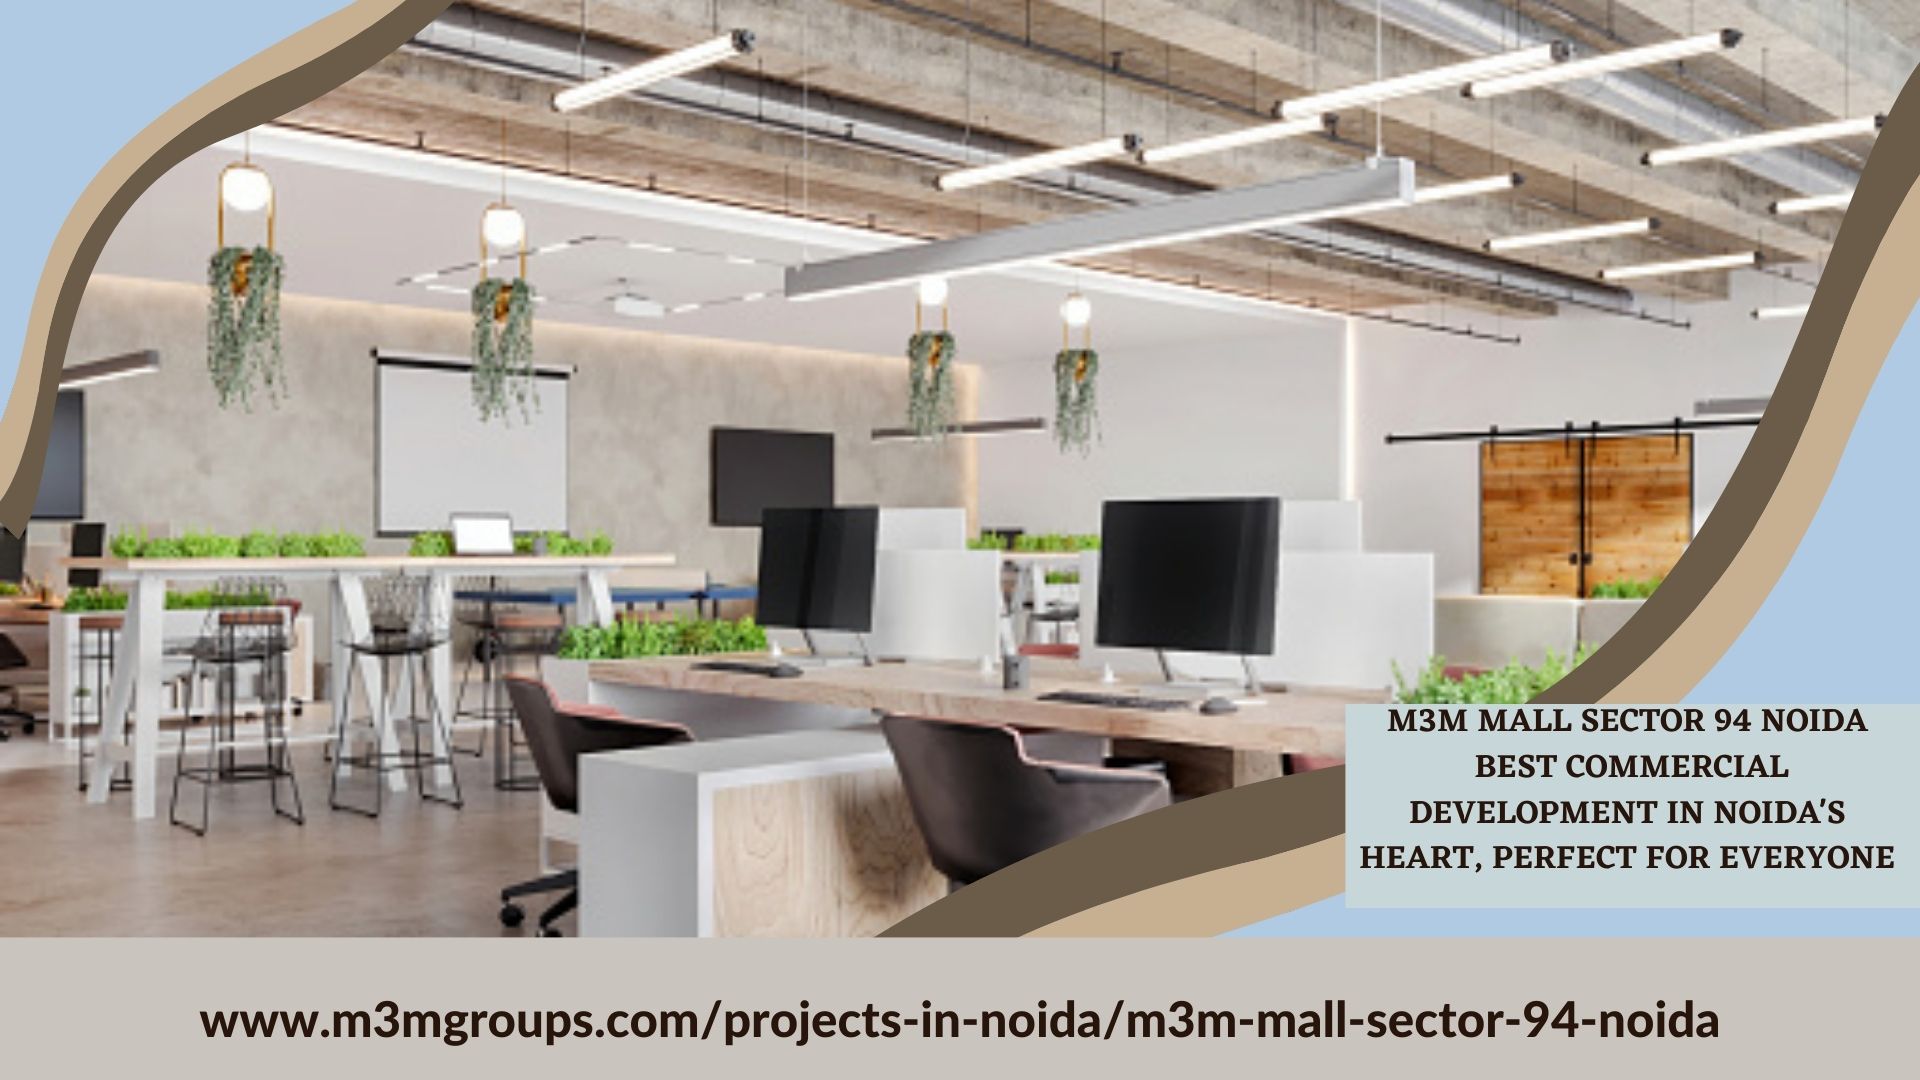 M3M Mall Sector 94 Noida World Class Commercial Project